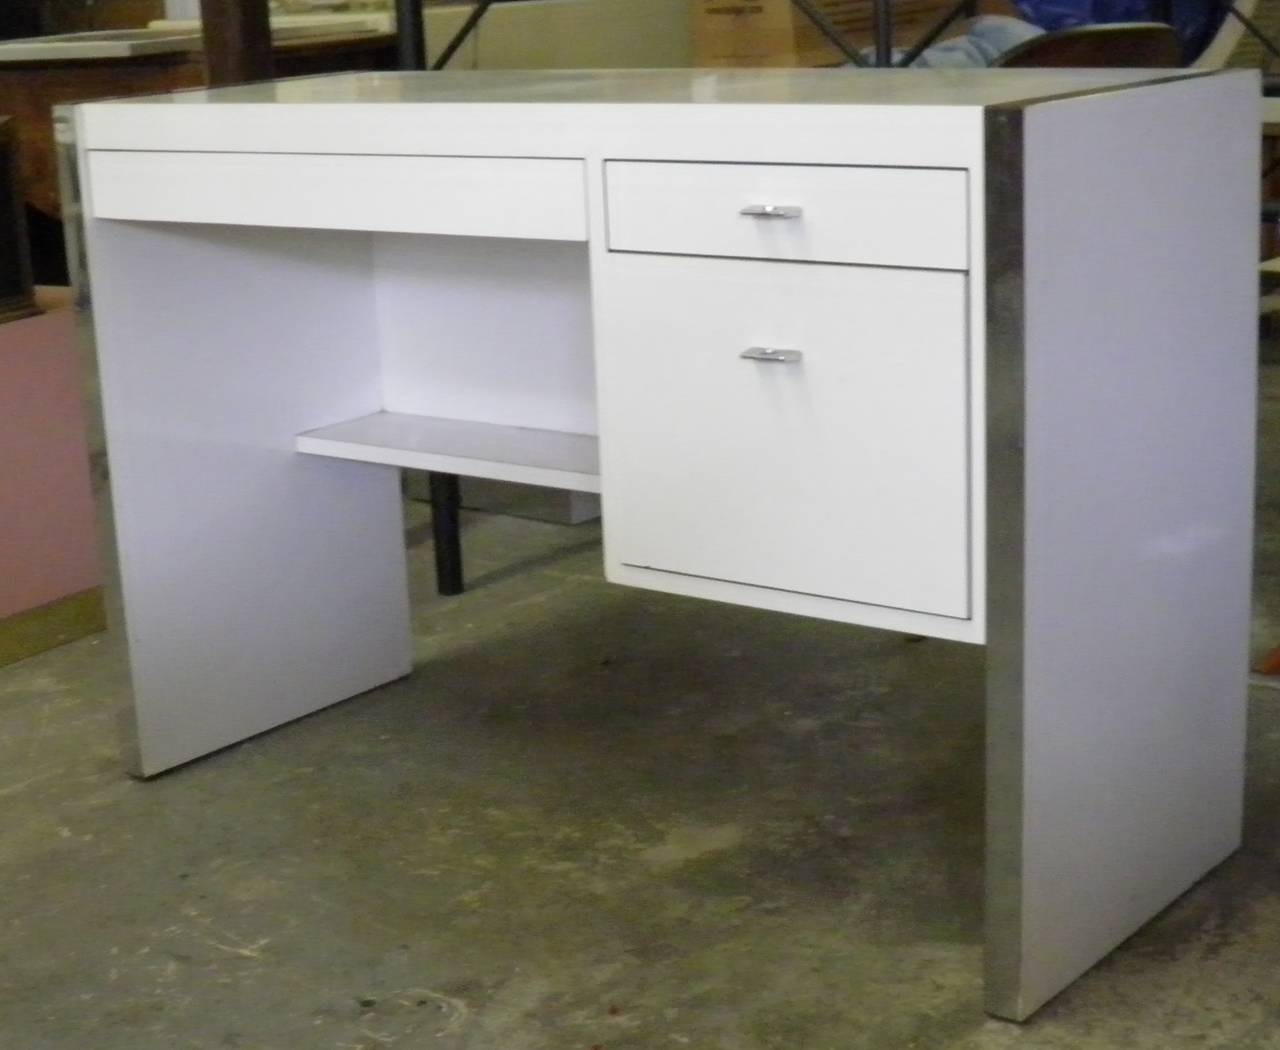 1960s vintage Modern Milo Baughman Style White Lacquered Desk with Stylish Chrome Banded Edges and Chrome Pulls- Great Storage--inside the large pencil drawer is green felt lining with a light oak desk accessory compartment, the pedestal has an oak